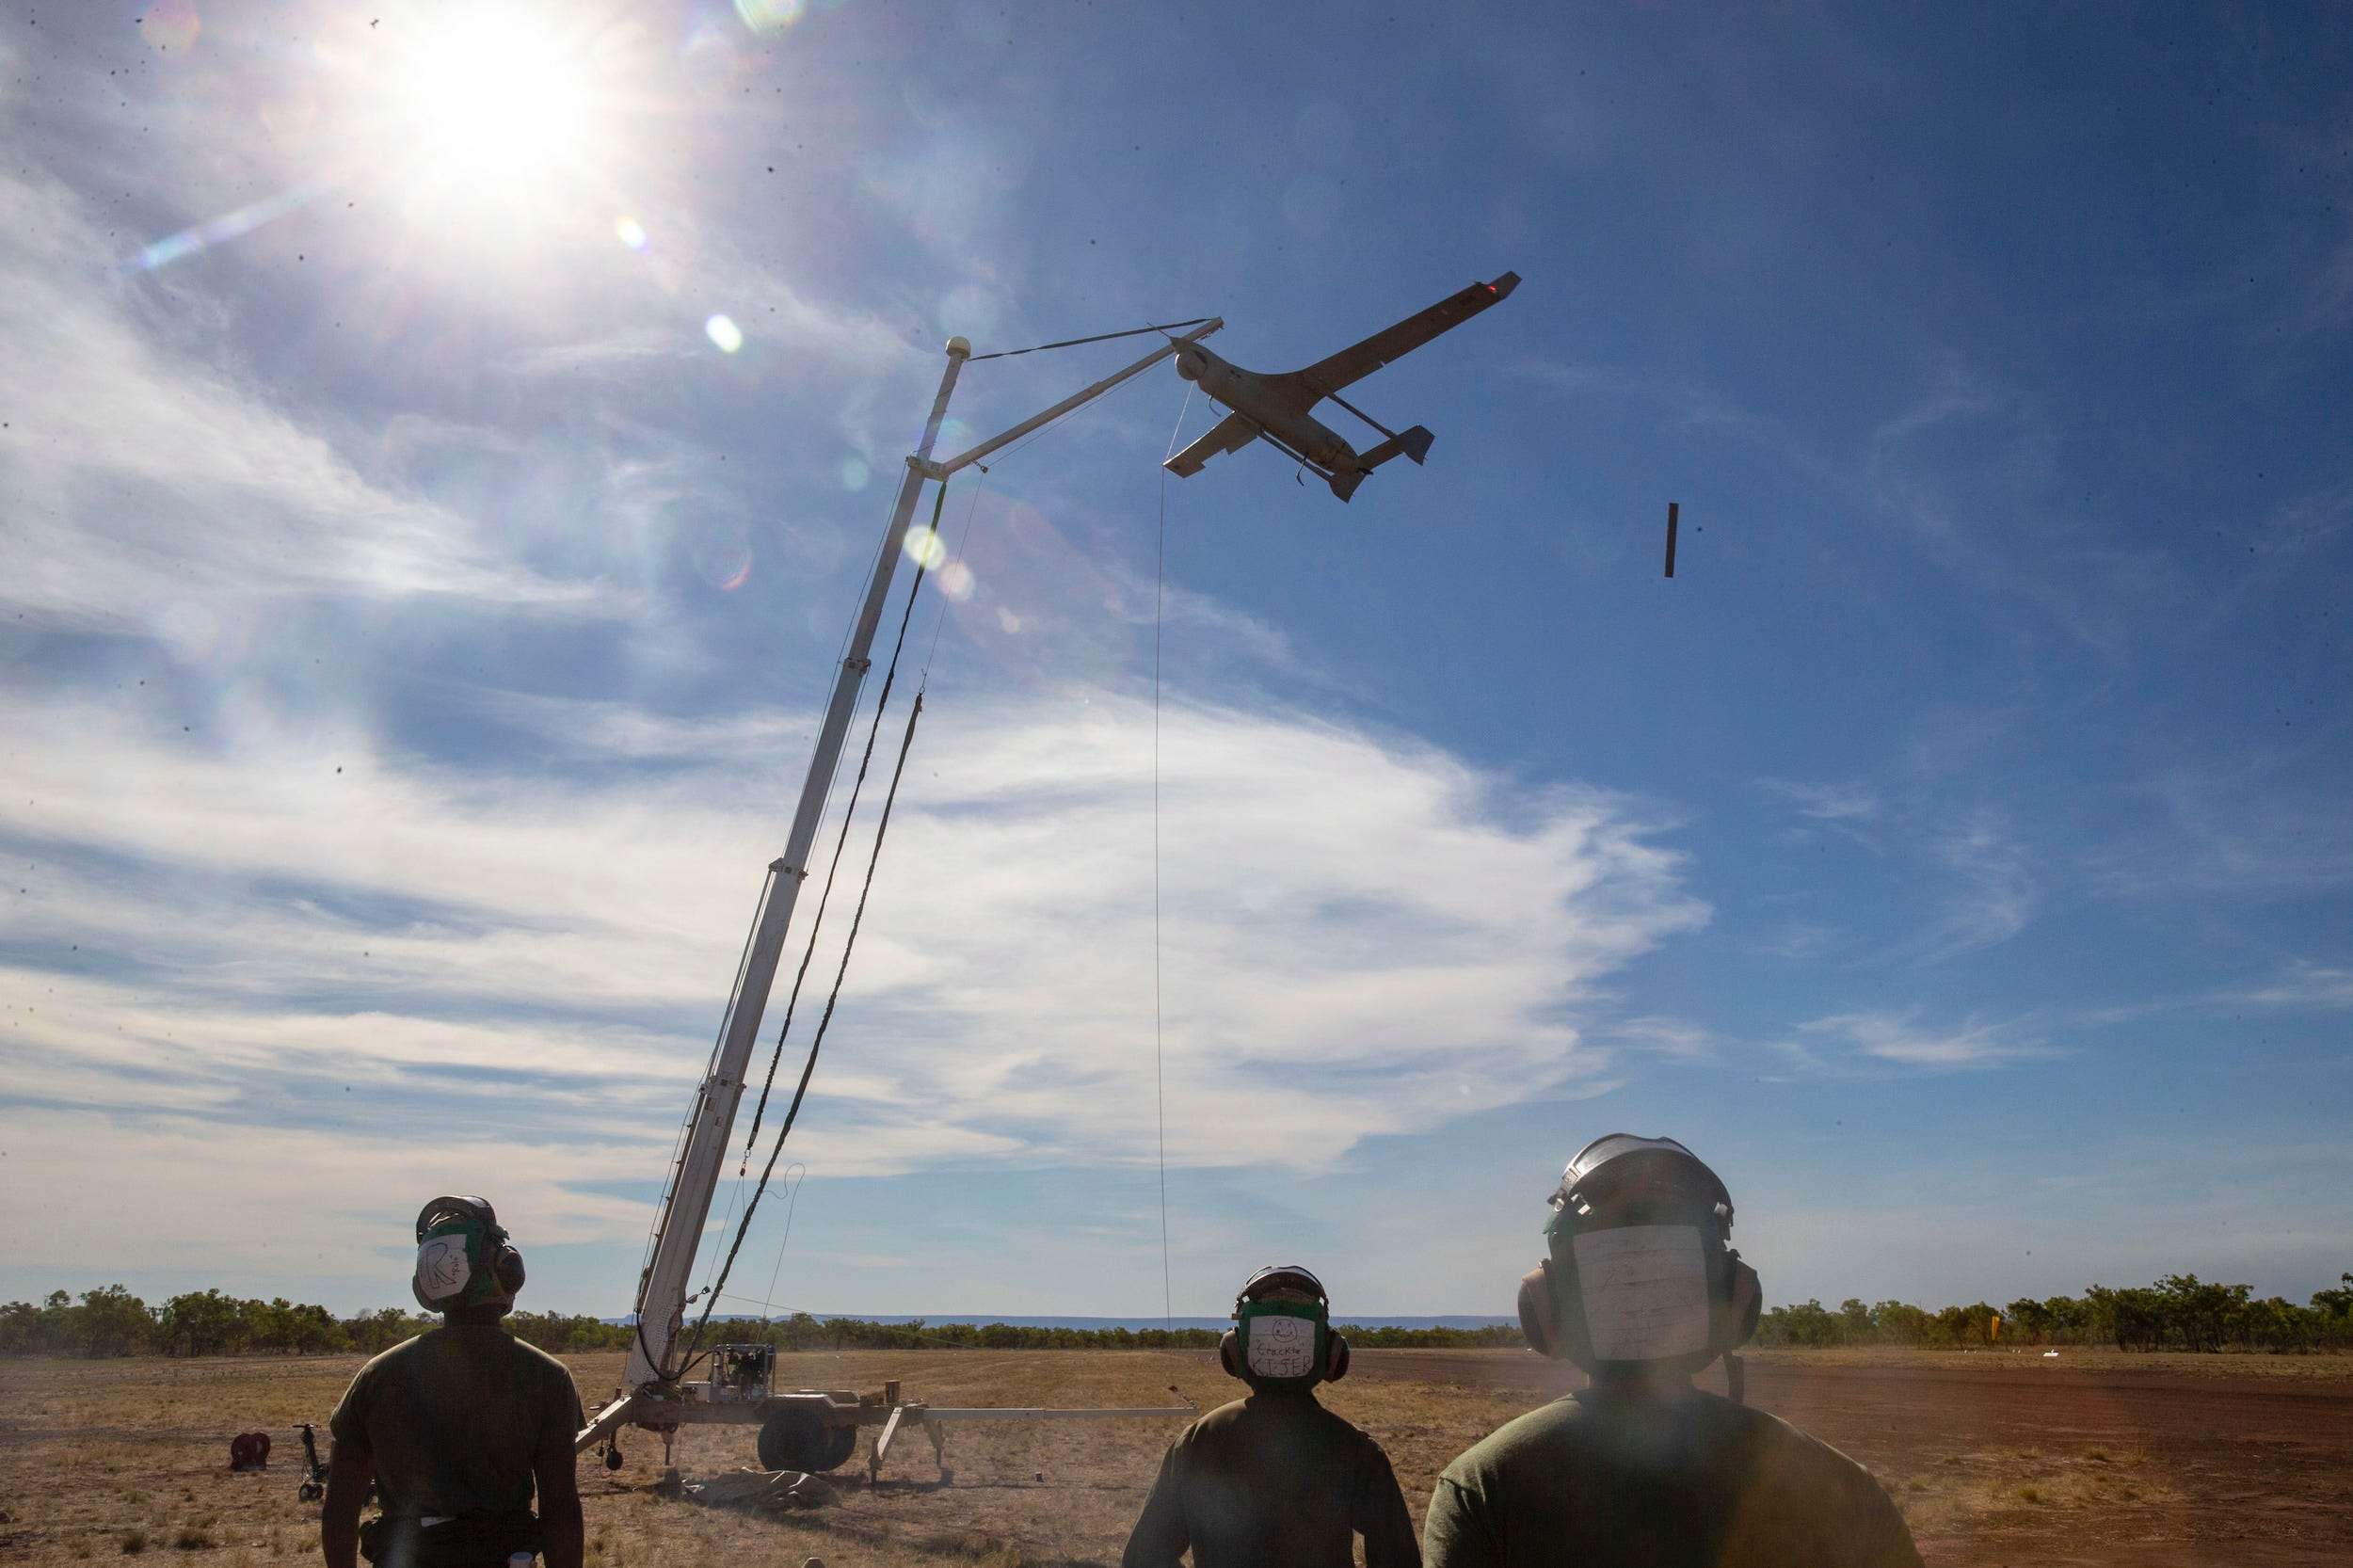 Marines flew their 'eye in the sky' in Australia for the first time ...